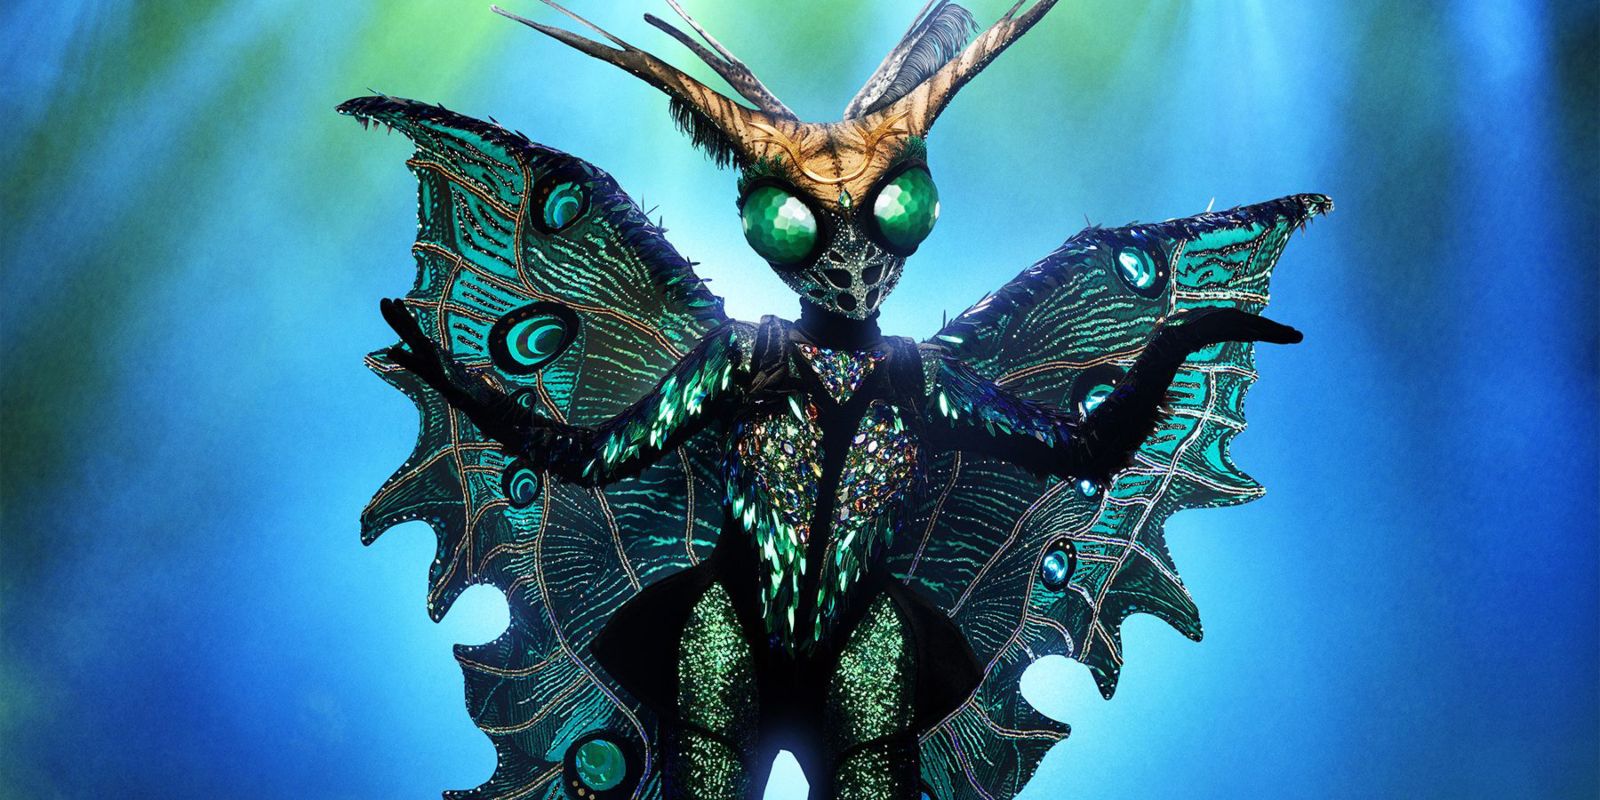 The Masked Singer Butterfly Revealed as Destiny’s Child’s Michelle Williams